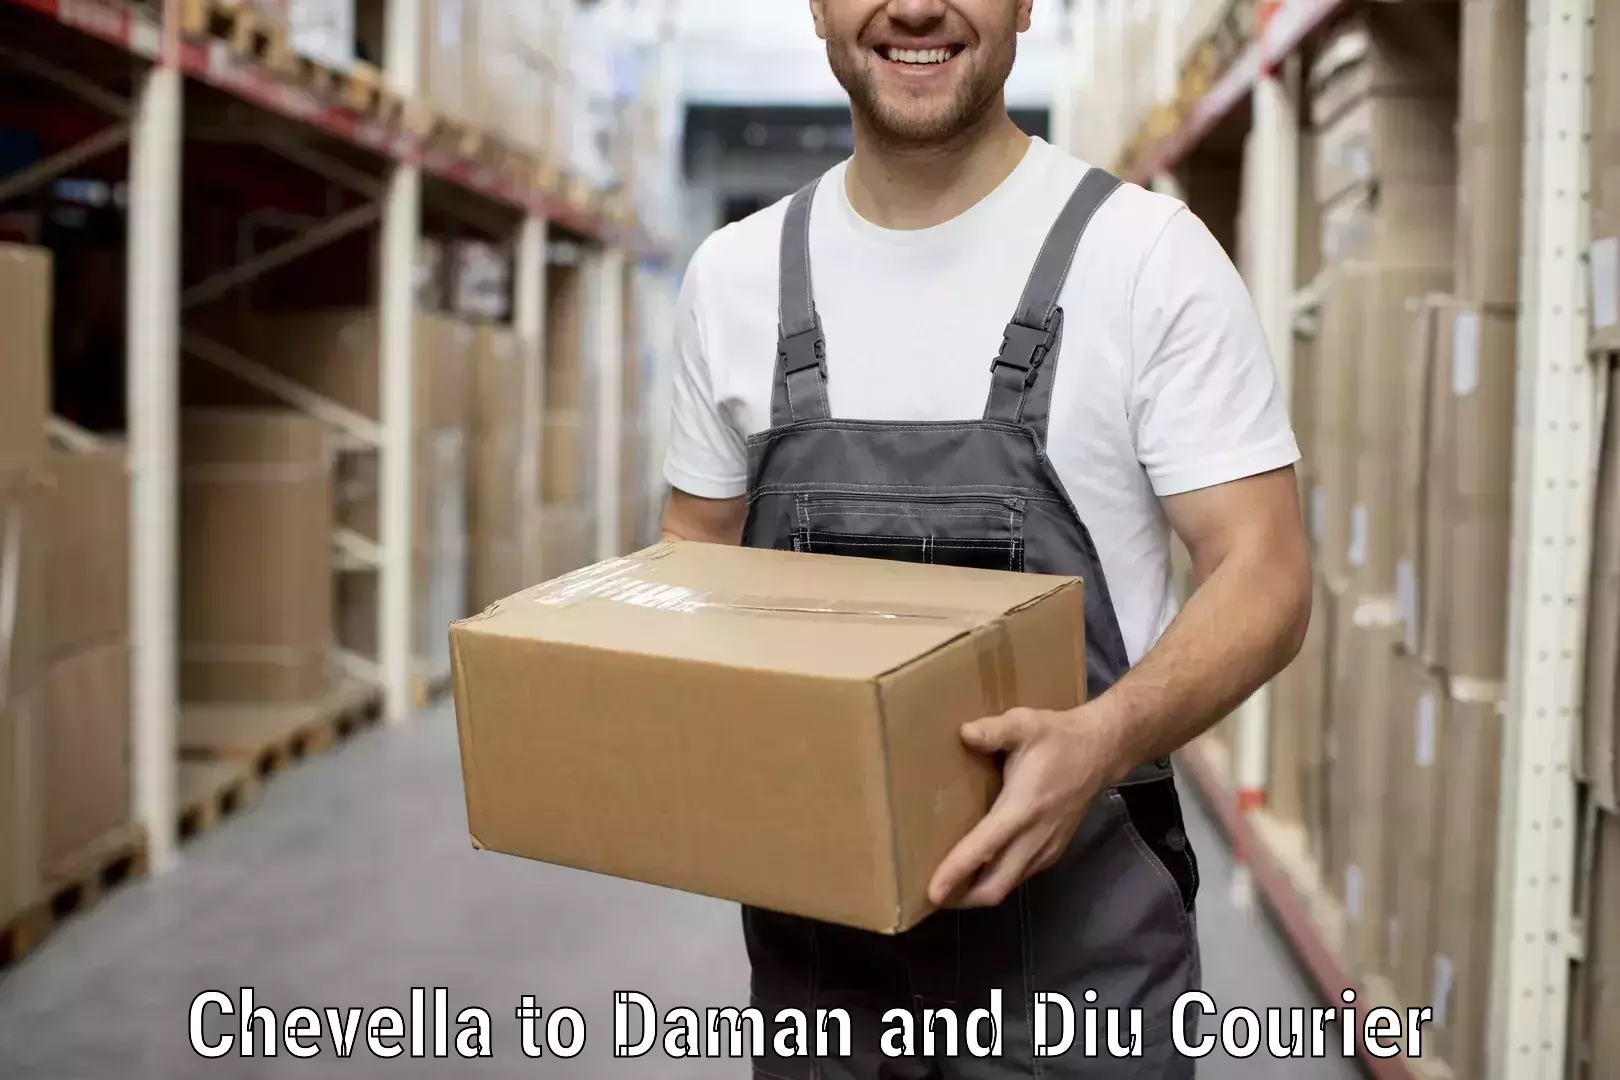 Reliable moving assistance Chevella to Diu